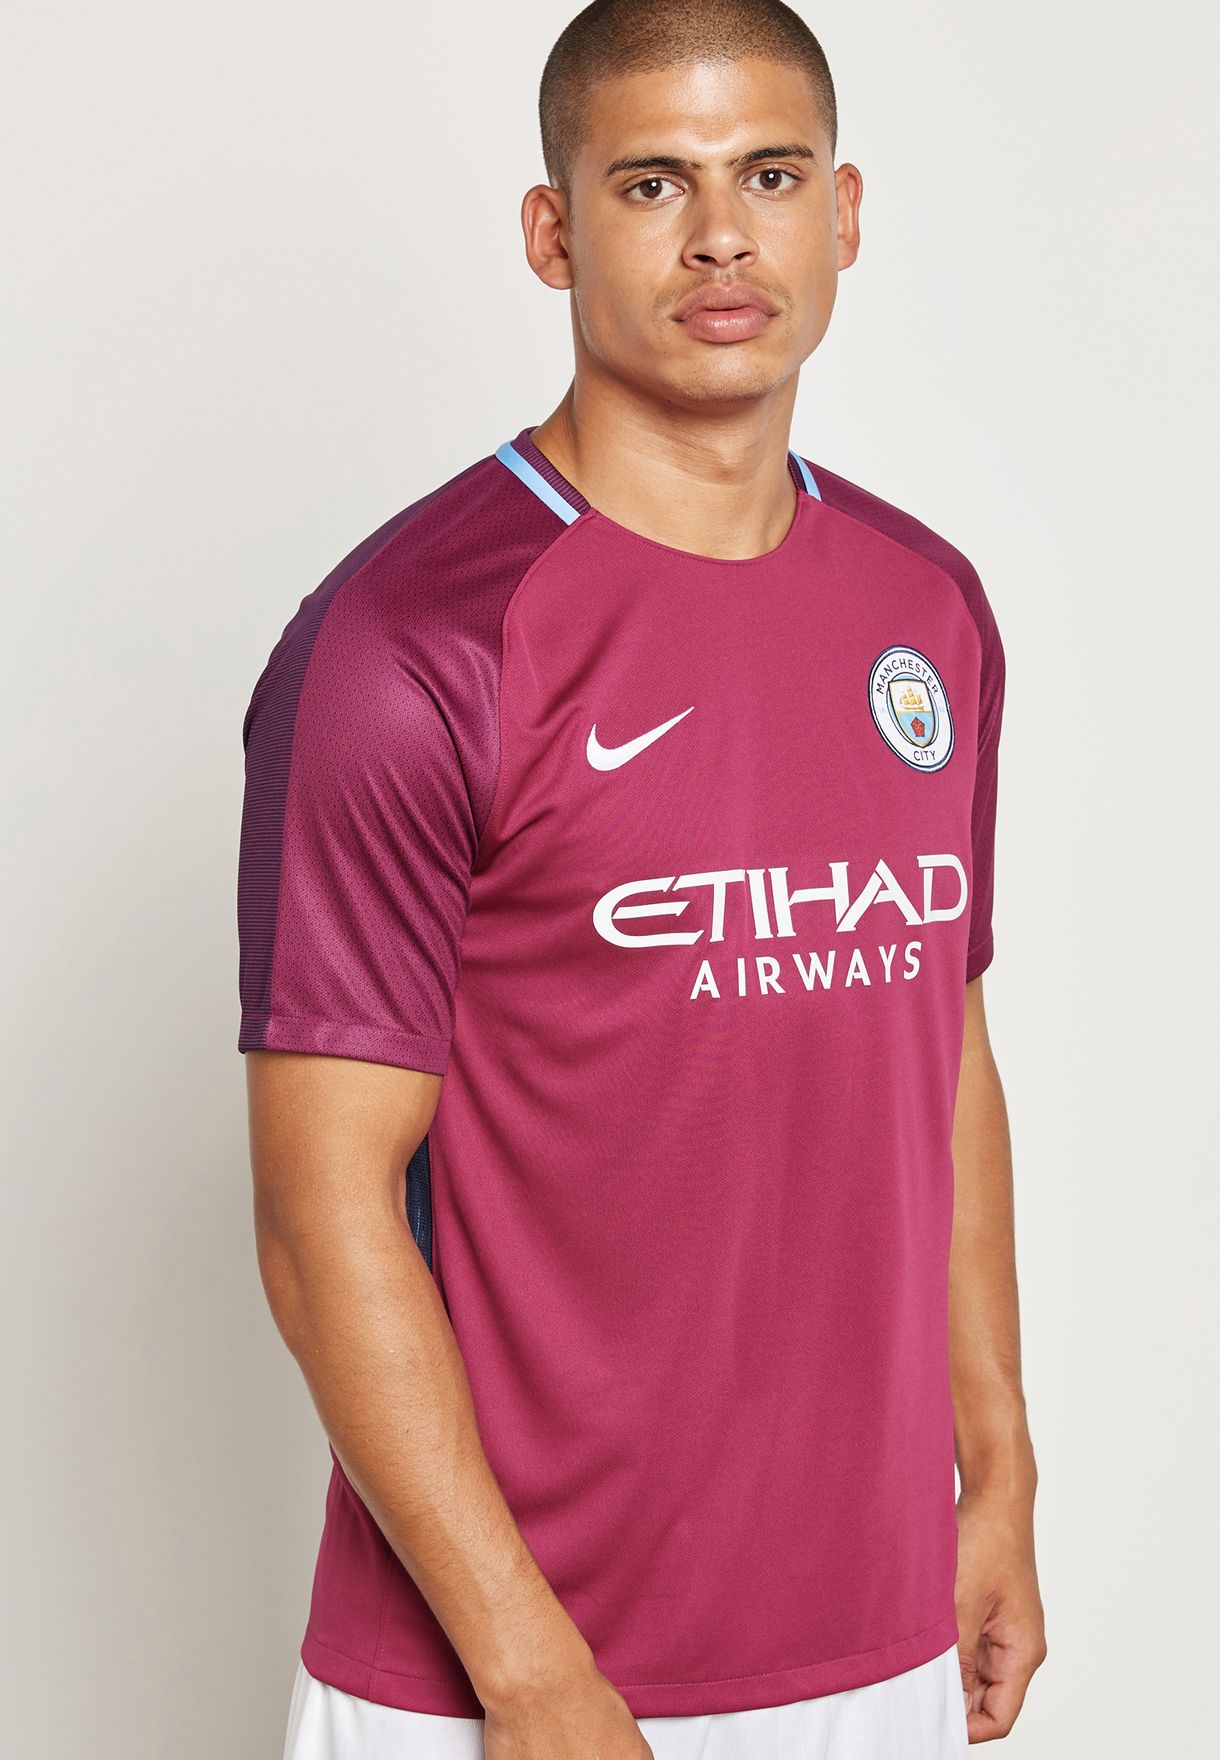 man city red jersey